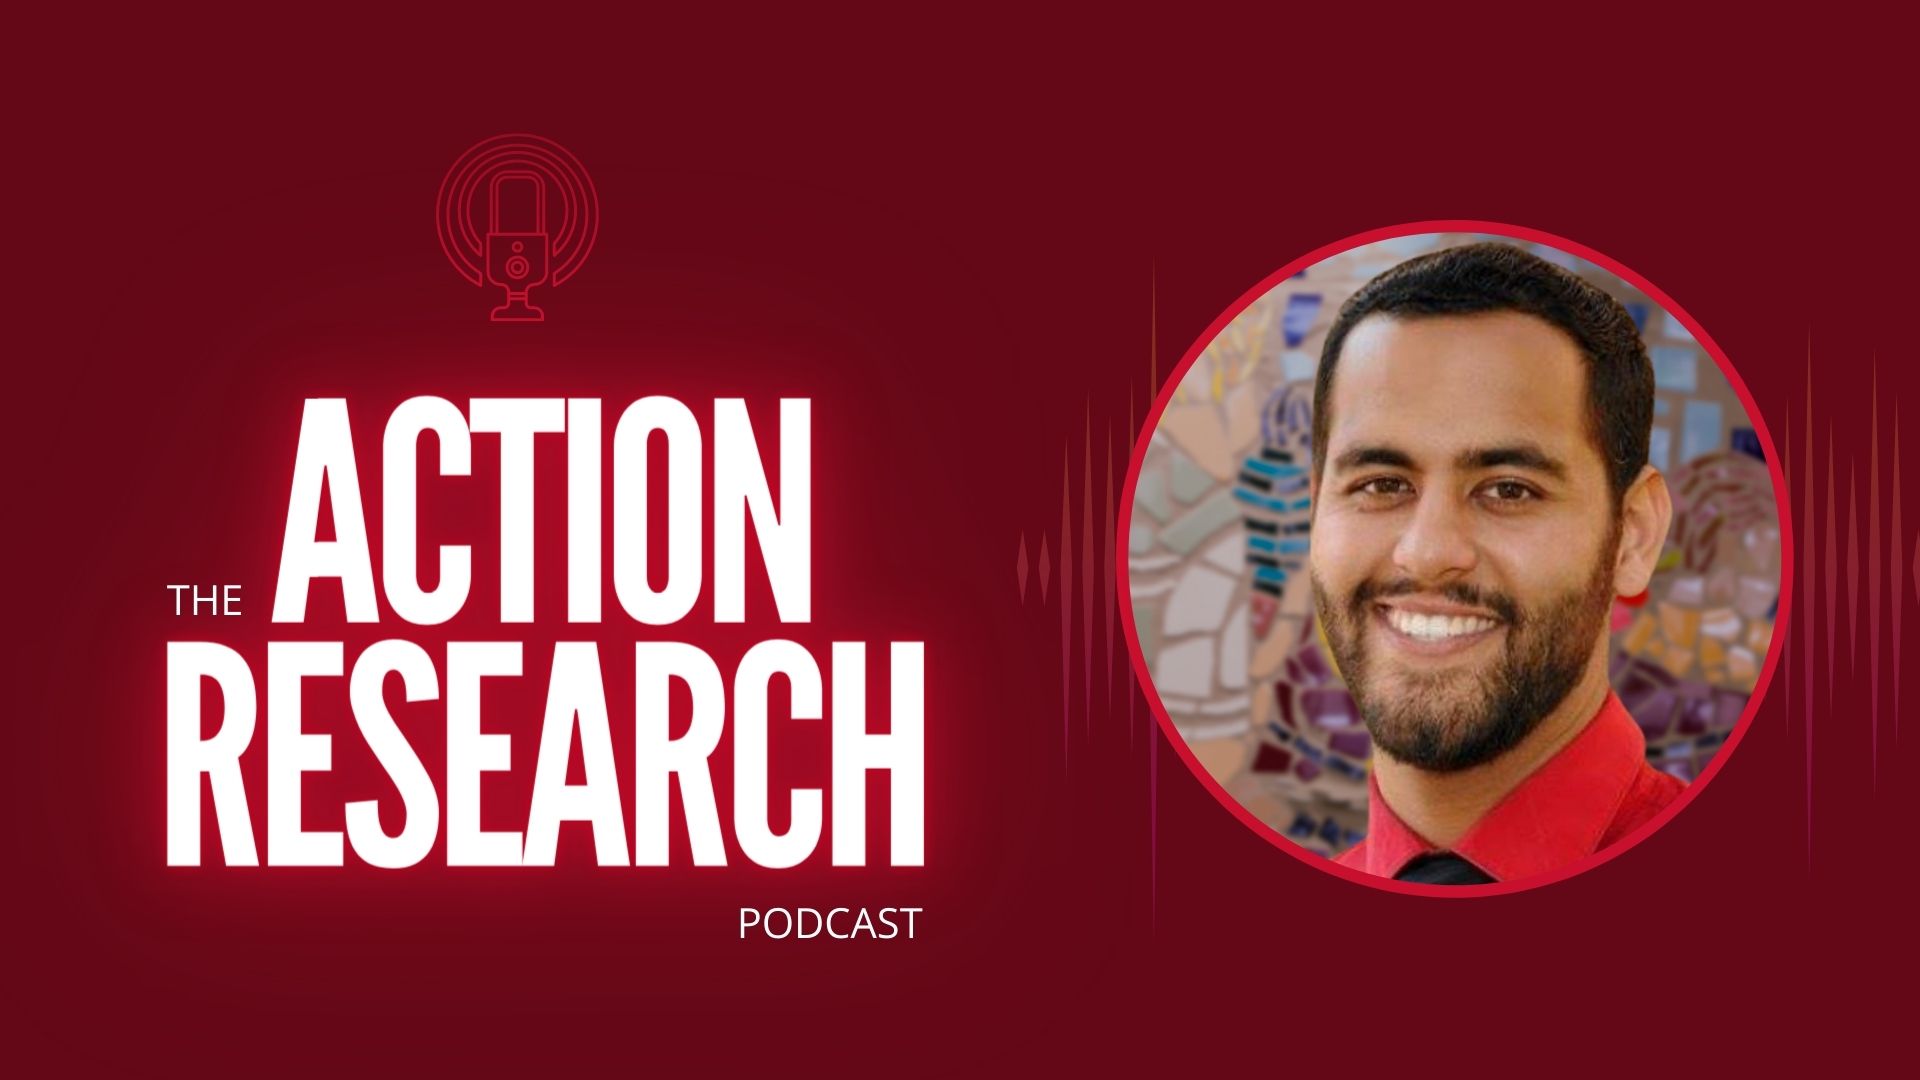 The Action Research Podcast with host Anil Arora